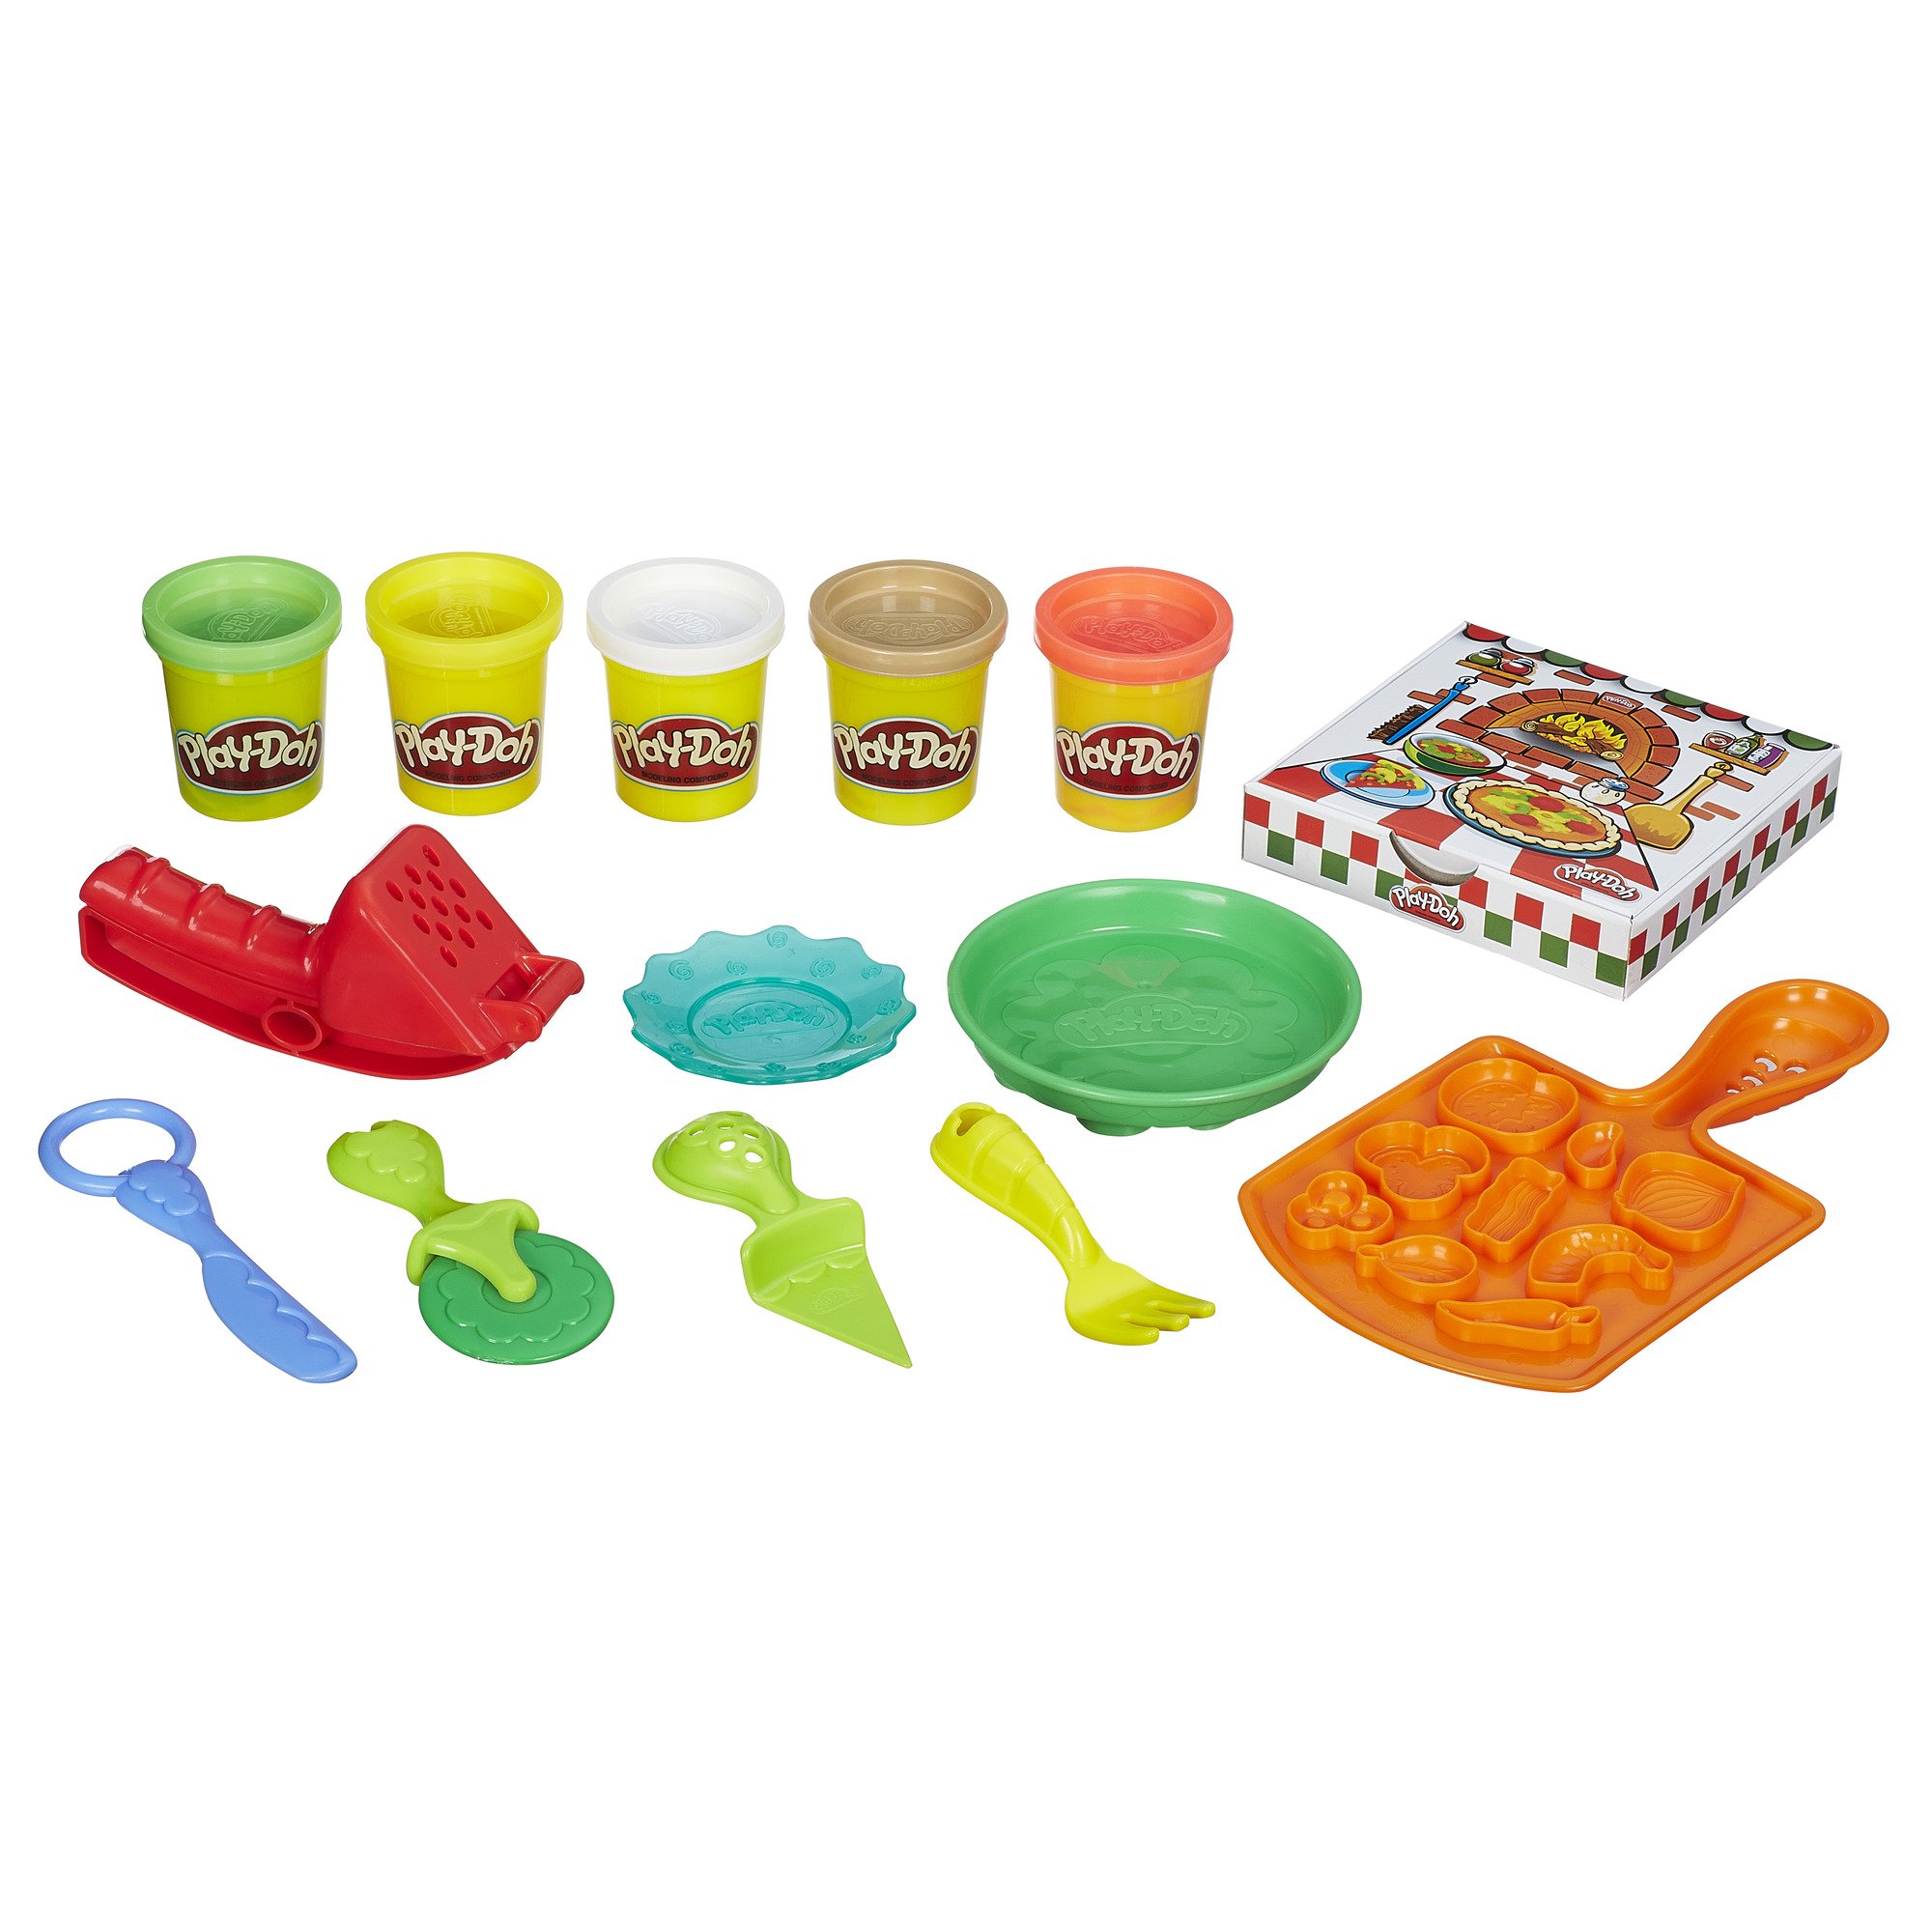 Play-doh Kitchen Creations Pizza Party Food Set with 5 Cans of Play-Doh - image 4 of 7